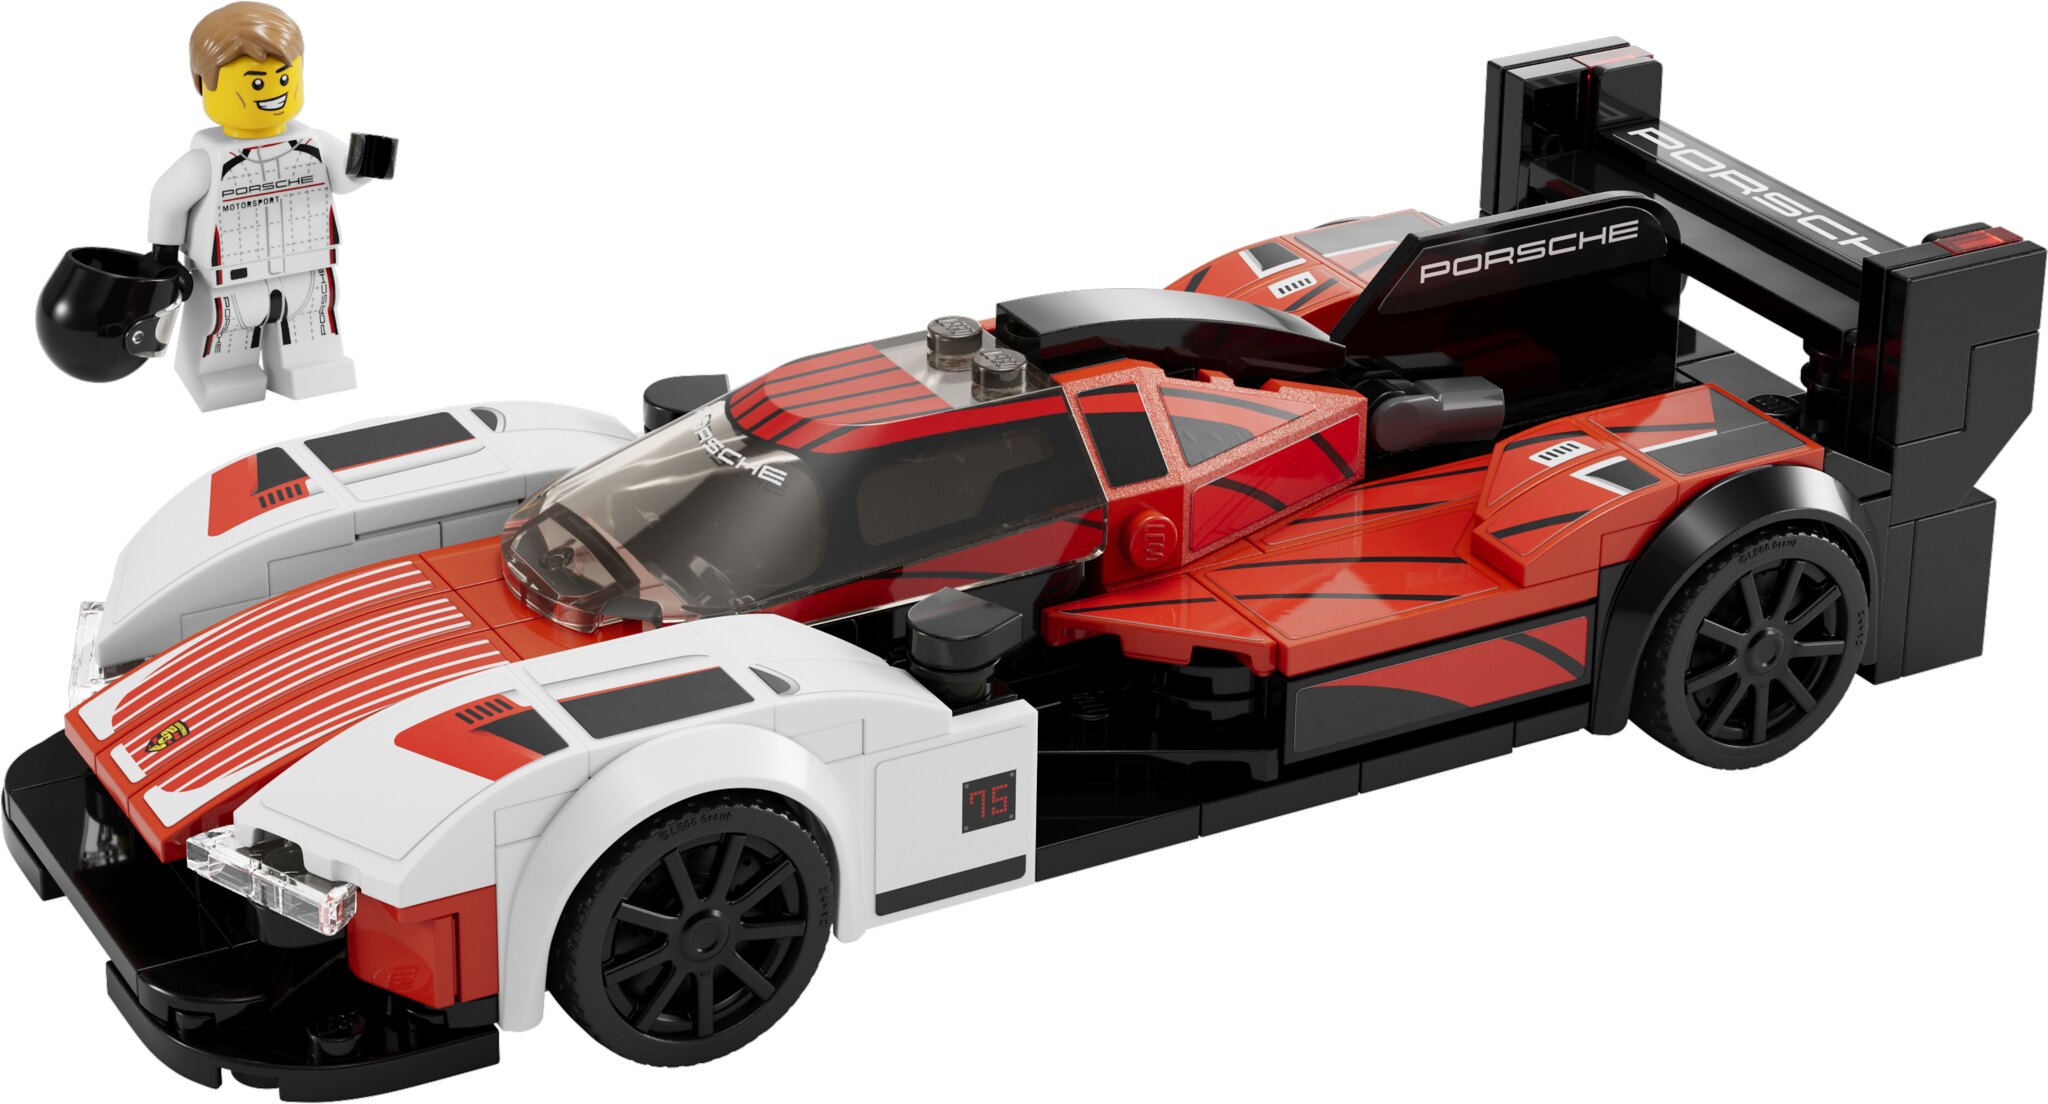 LEGO(R)Speed Champions New Sets Revealed